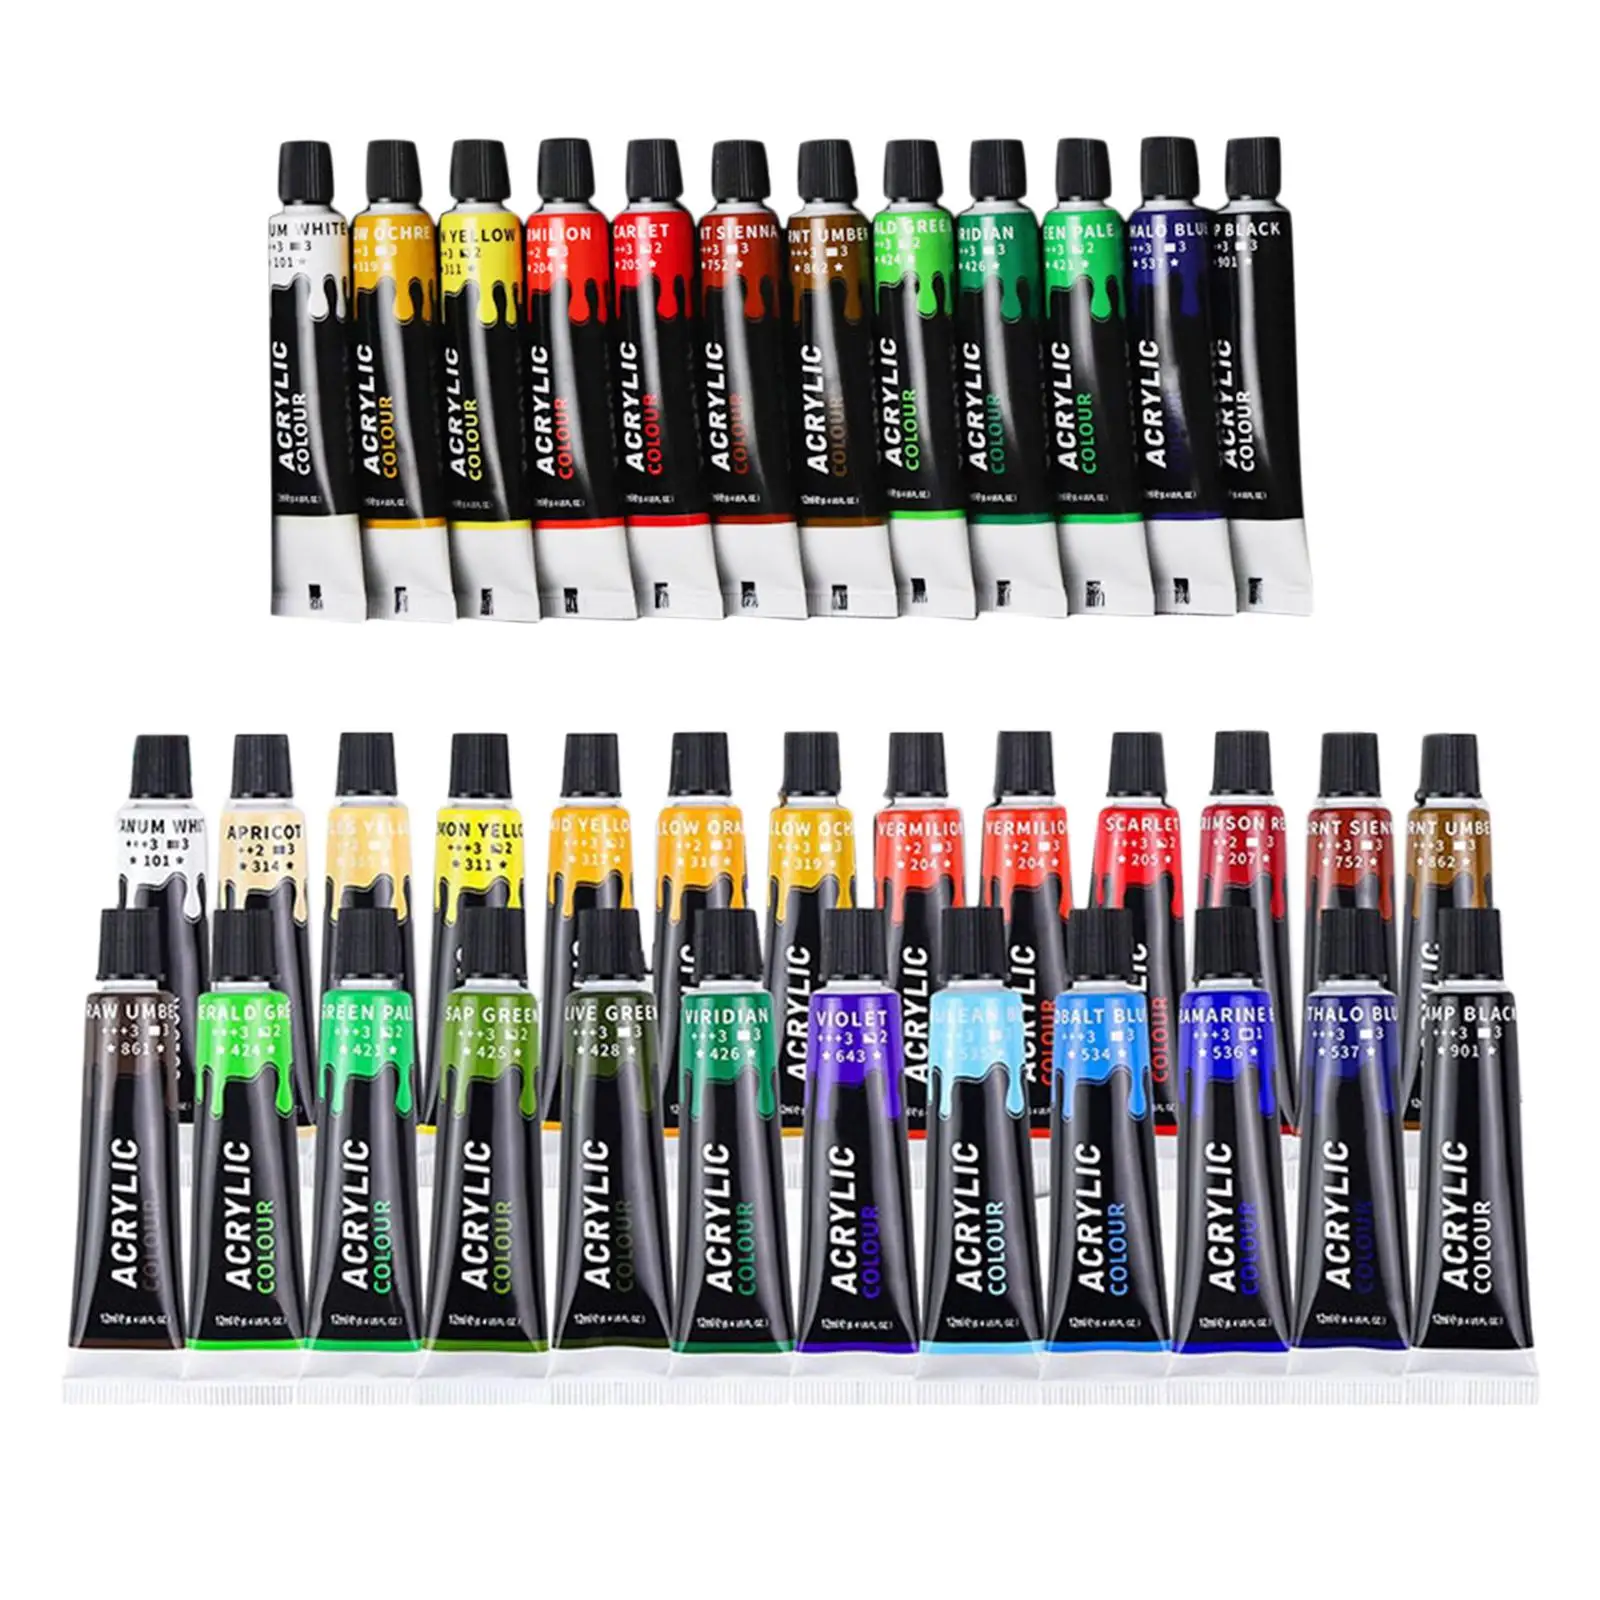 Acrylic for Adults,-Acrylic Painting Supplies ,(12ml),for Acrylic Painting Beginner